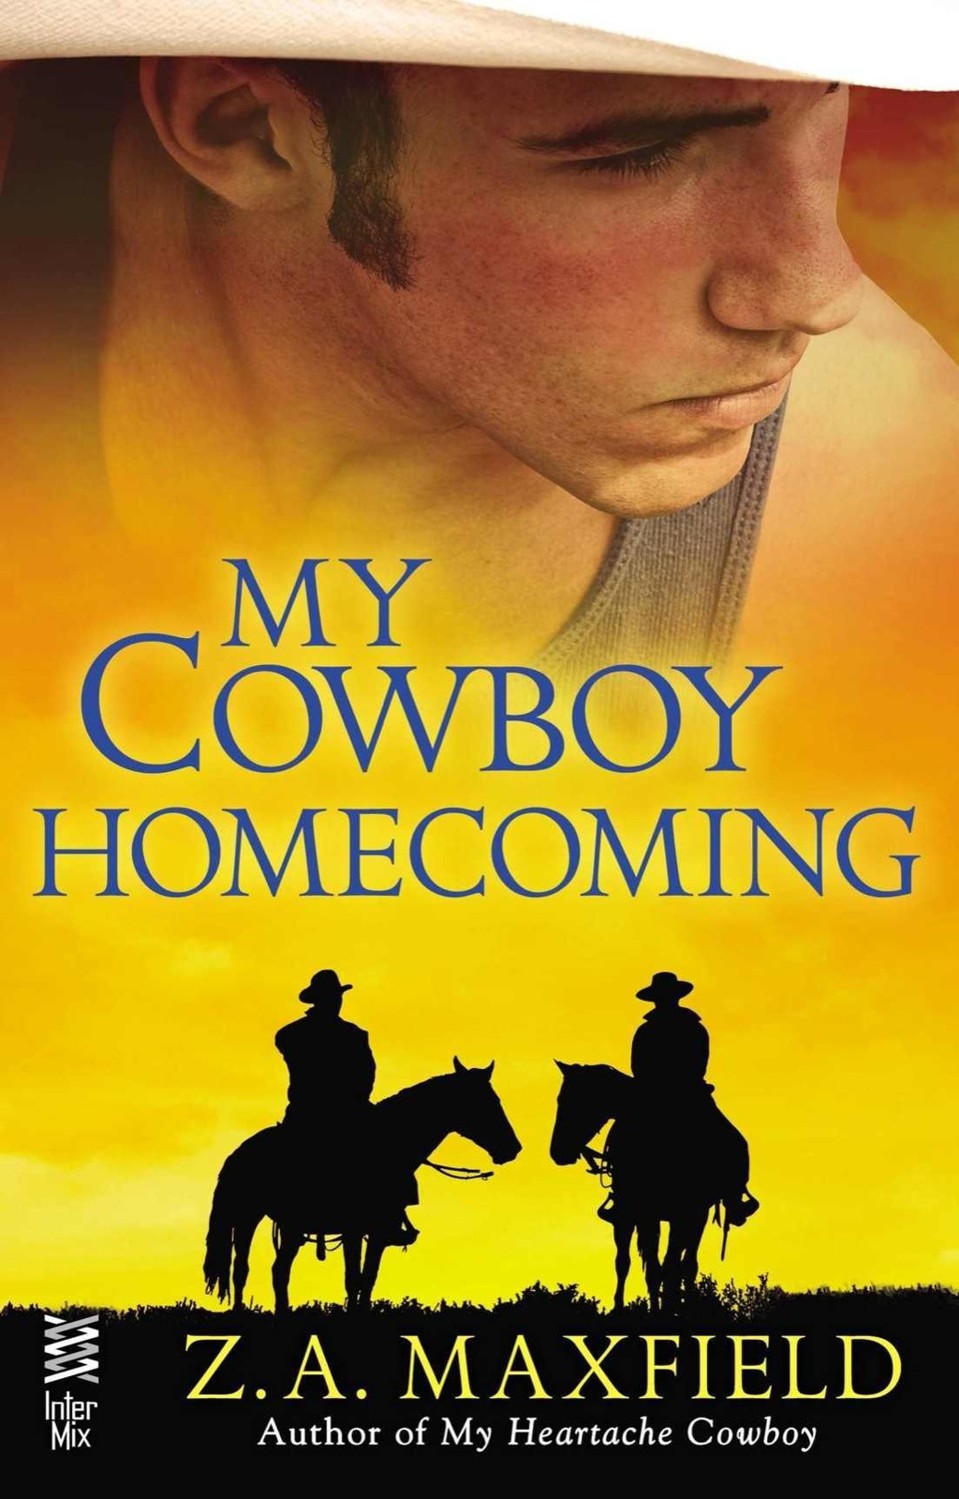 Cowboys 03 - My Cowboy Homecoming by Z.A. Maxfield